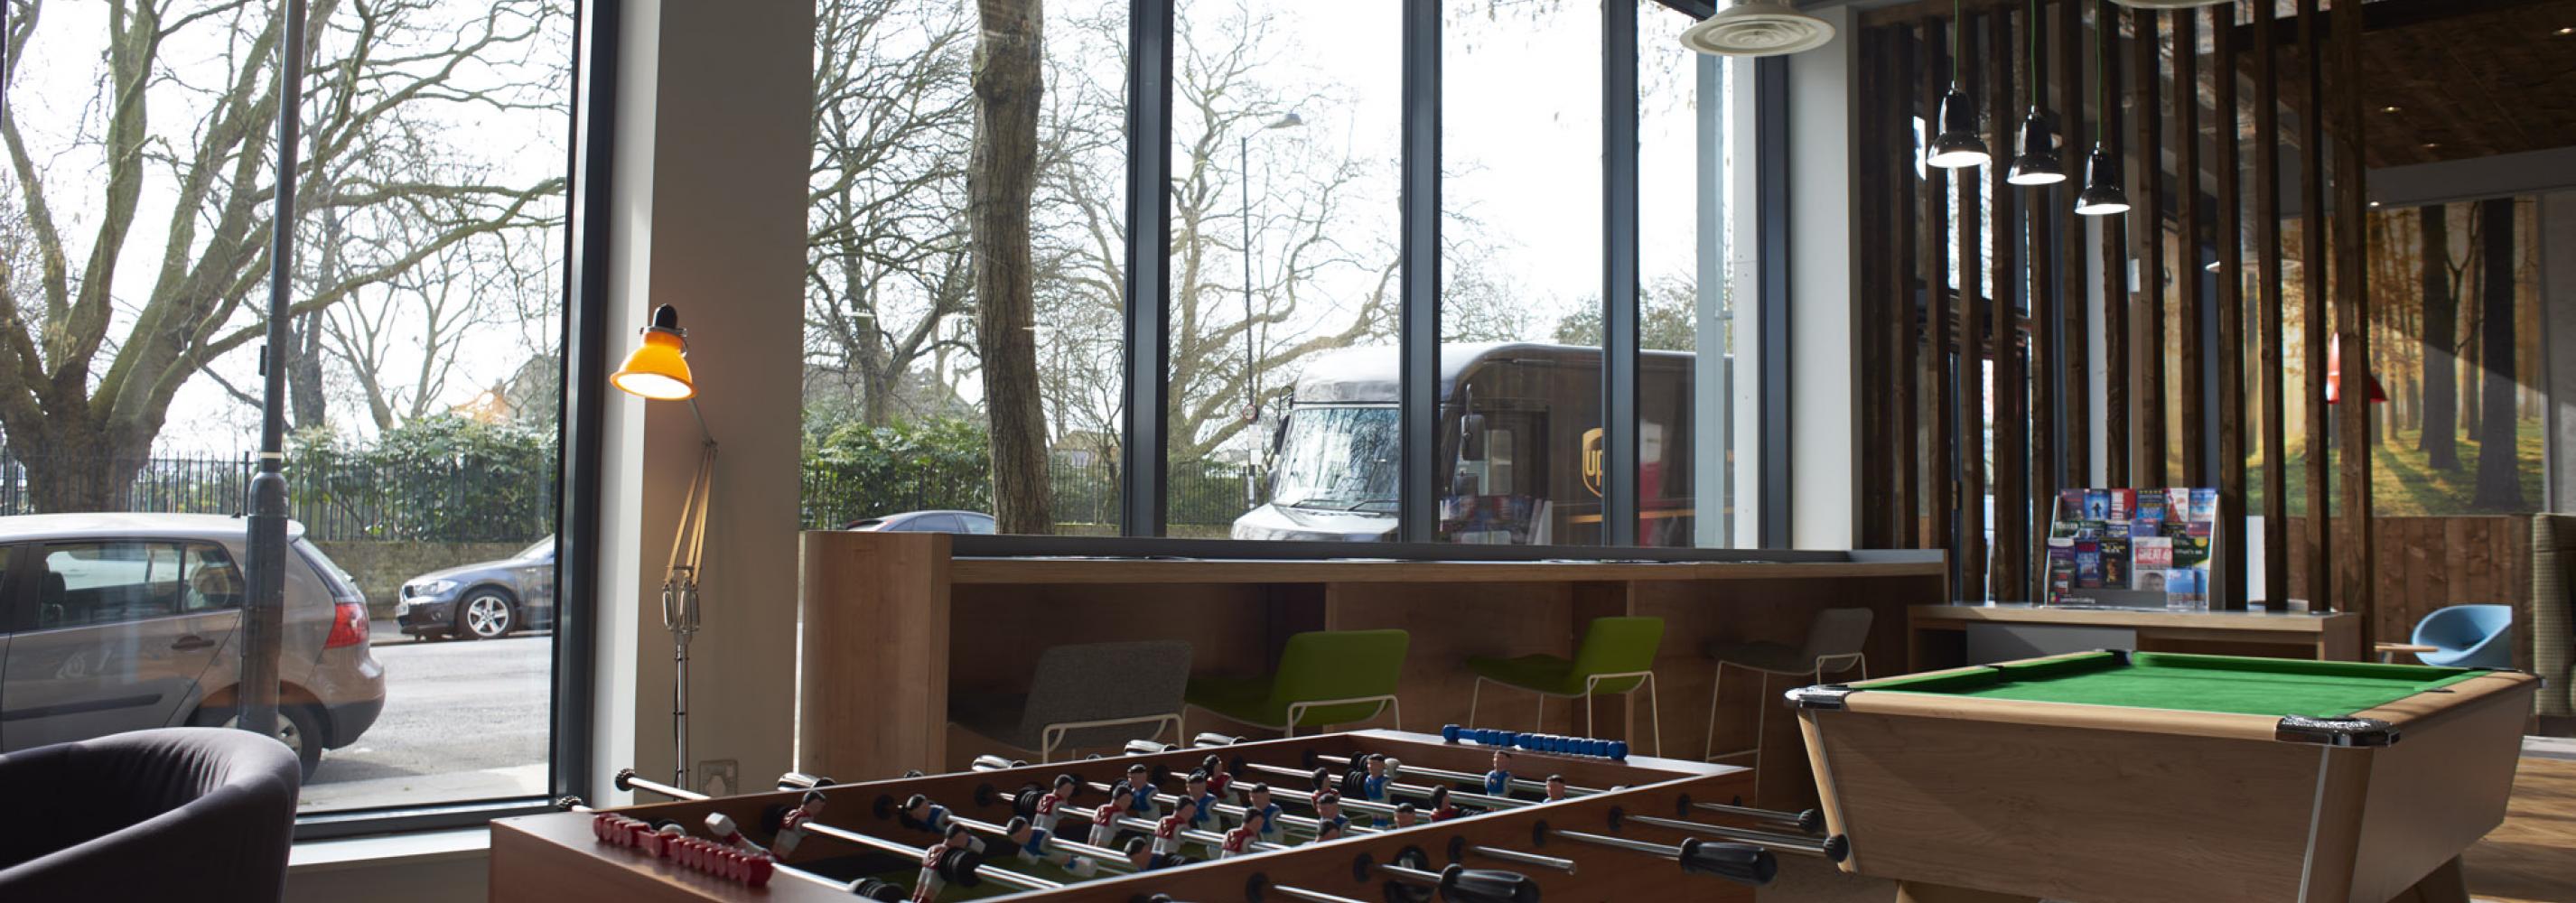 Common Room with Pool table and table football